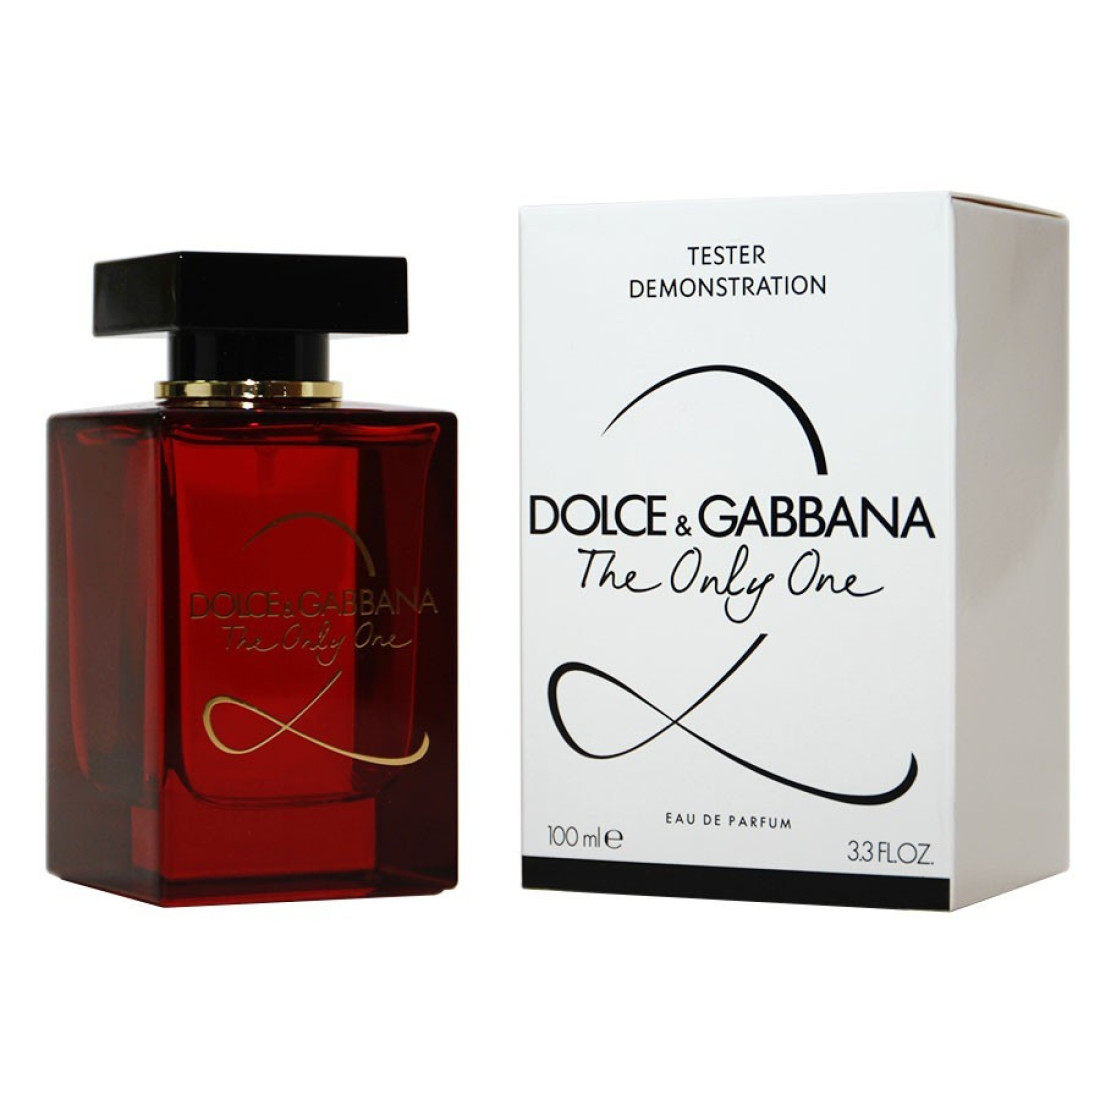 Духи dolce only one. Dolce& Gabbana the only one 2 EDP, 100 ml. Dolce Gabbana the only one 2 100 мл. Dolce & Gabbana the only one, EDP., 100 ml. Dolce Gabbana the only one 100ml.